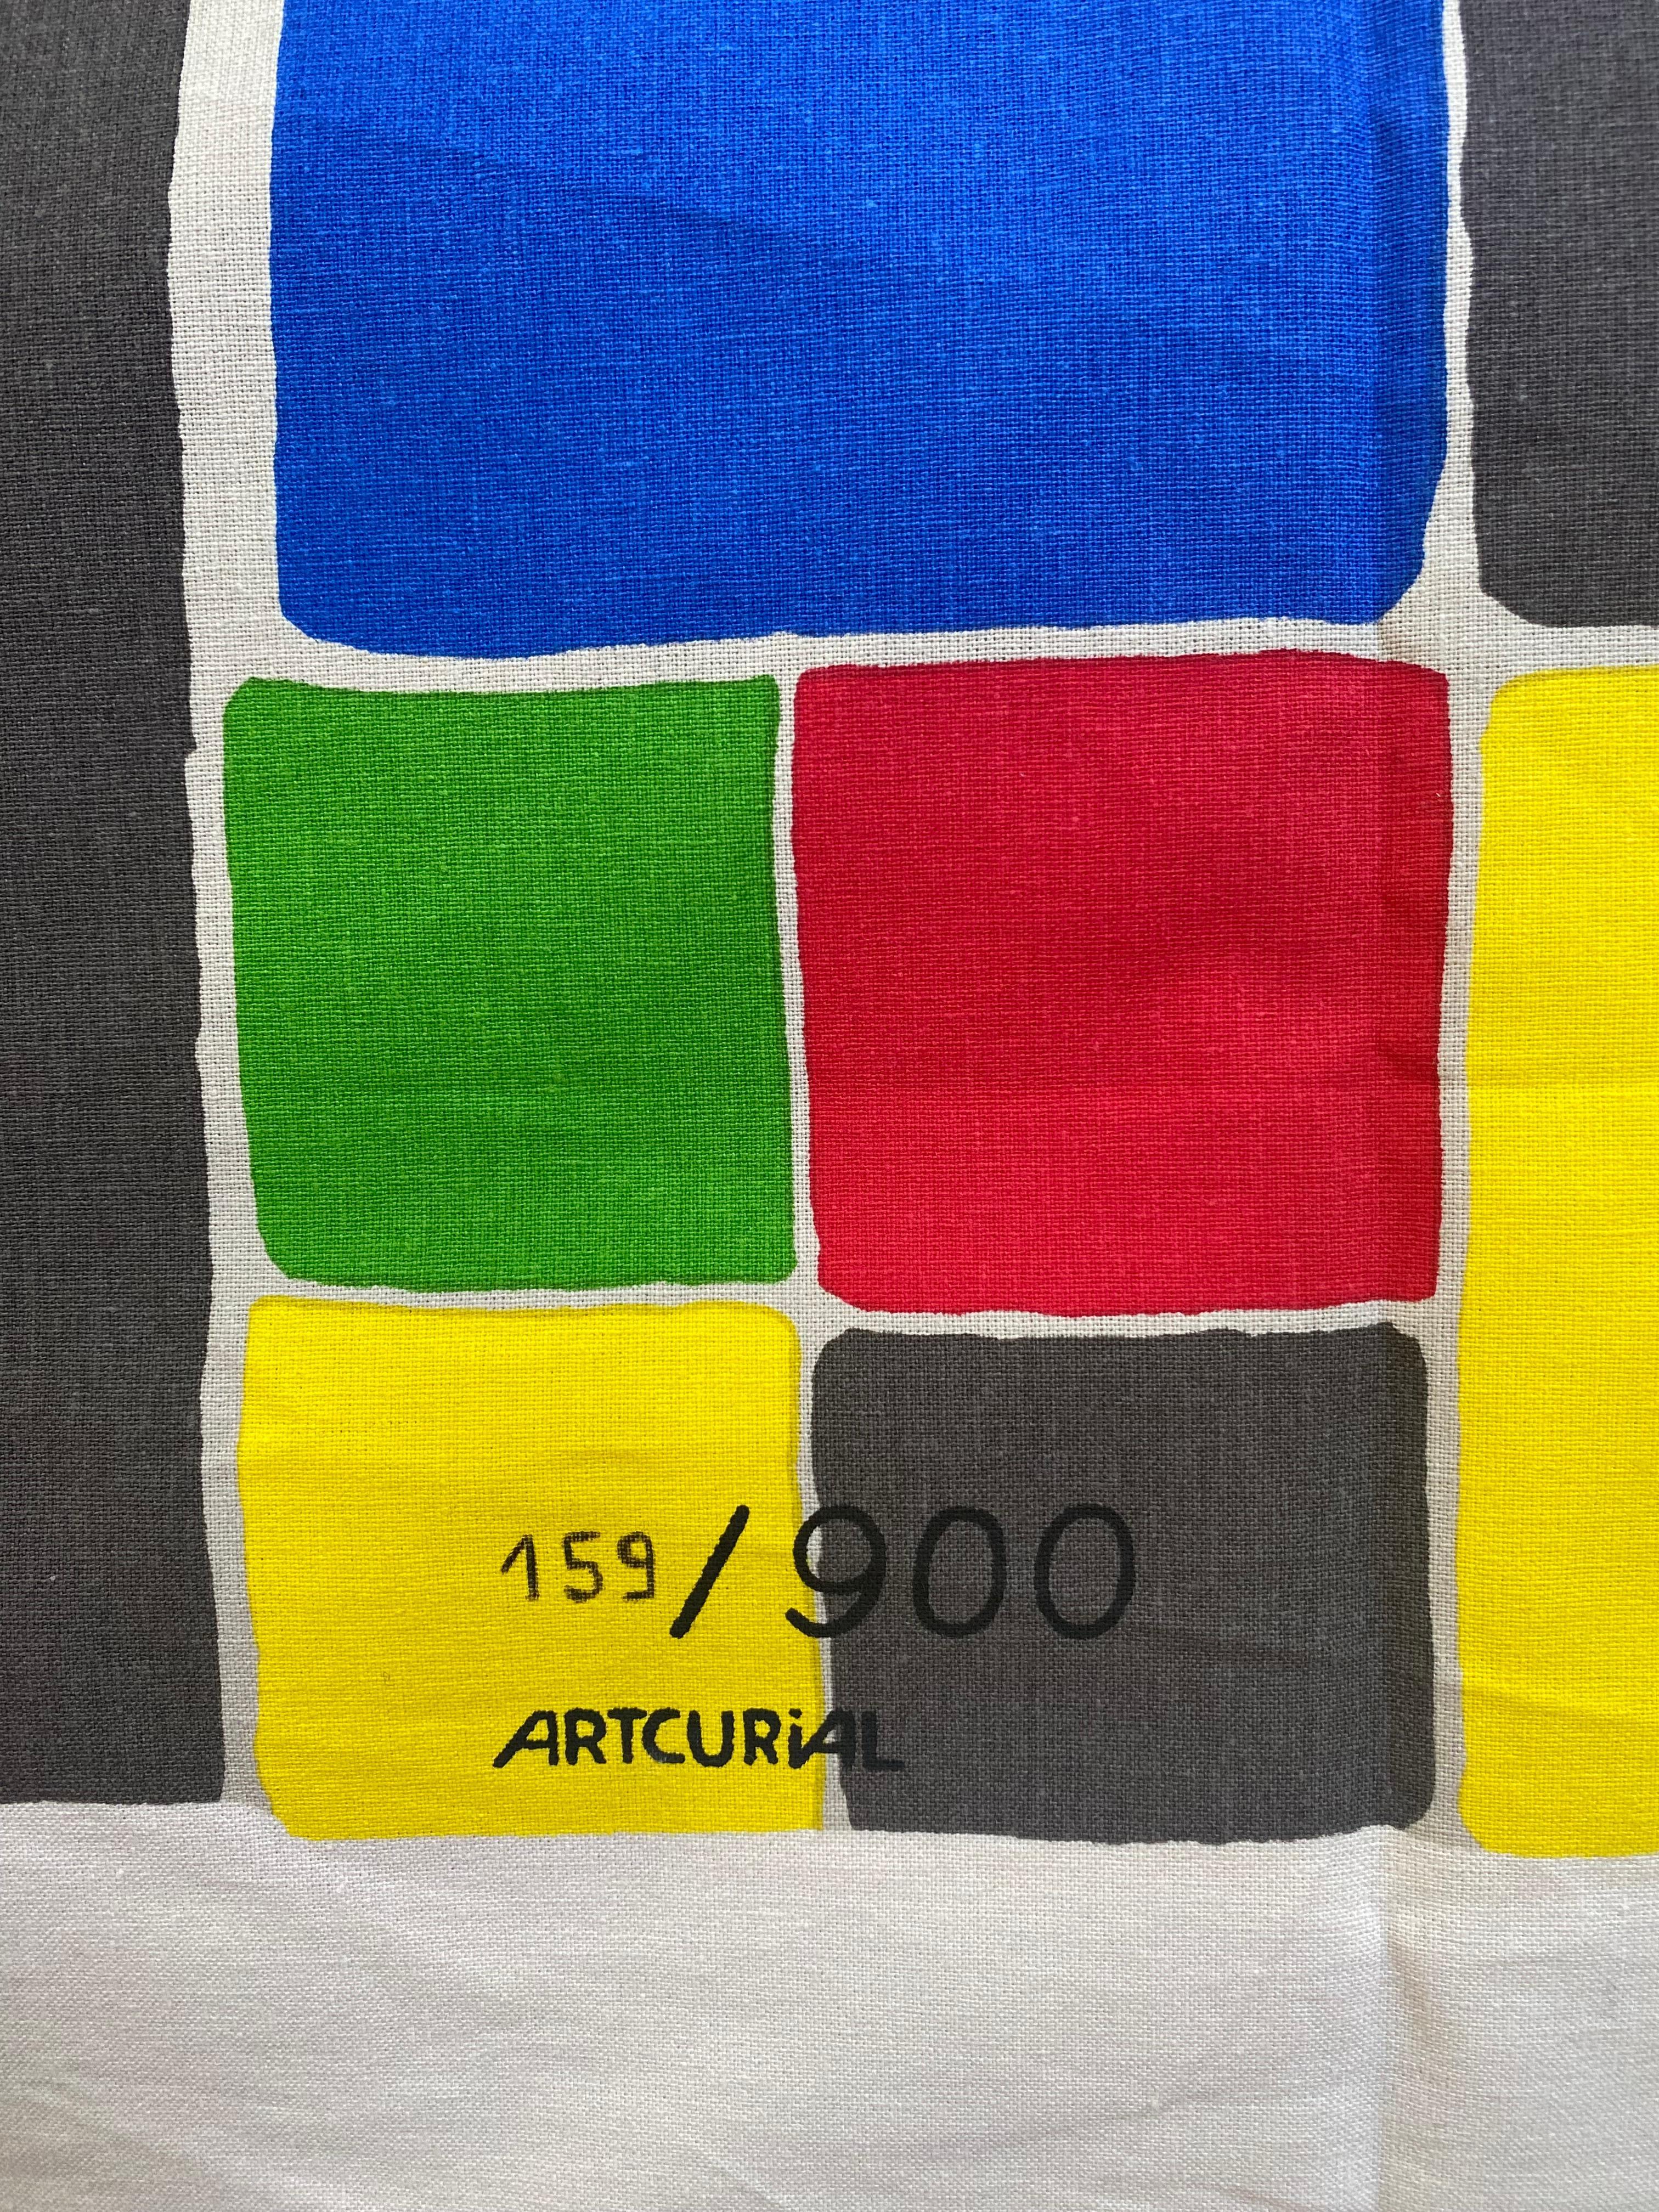 Fabric Sonia Delaunay  polychrome of squares  Silkscreen on fabric Bianchini Férier For Sale